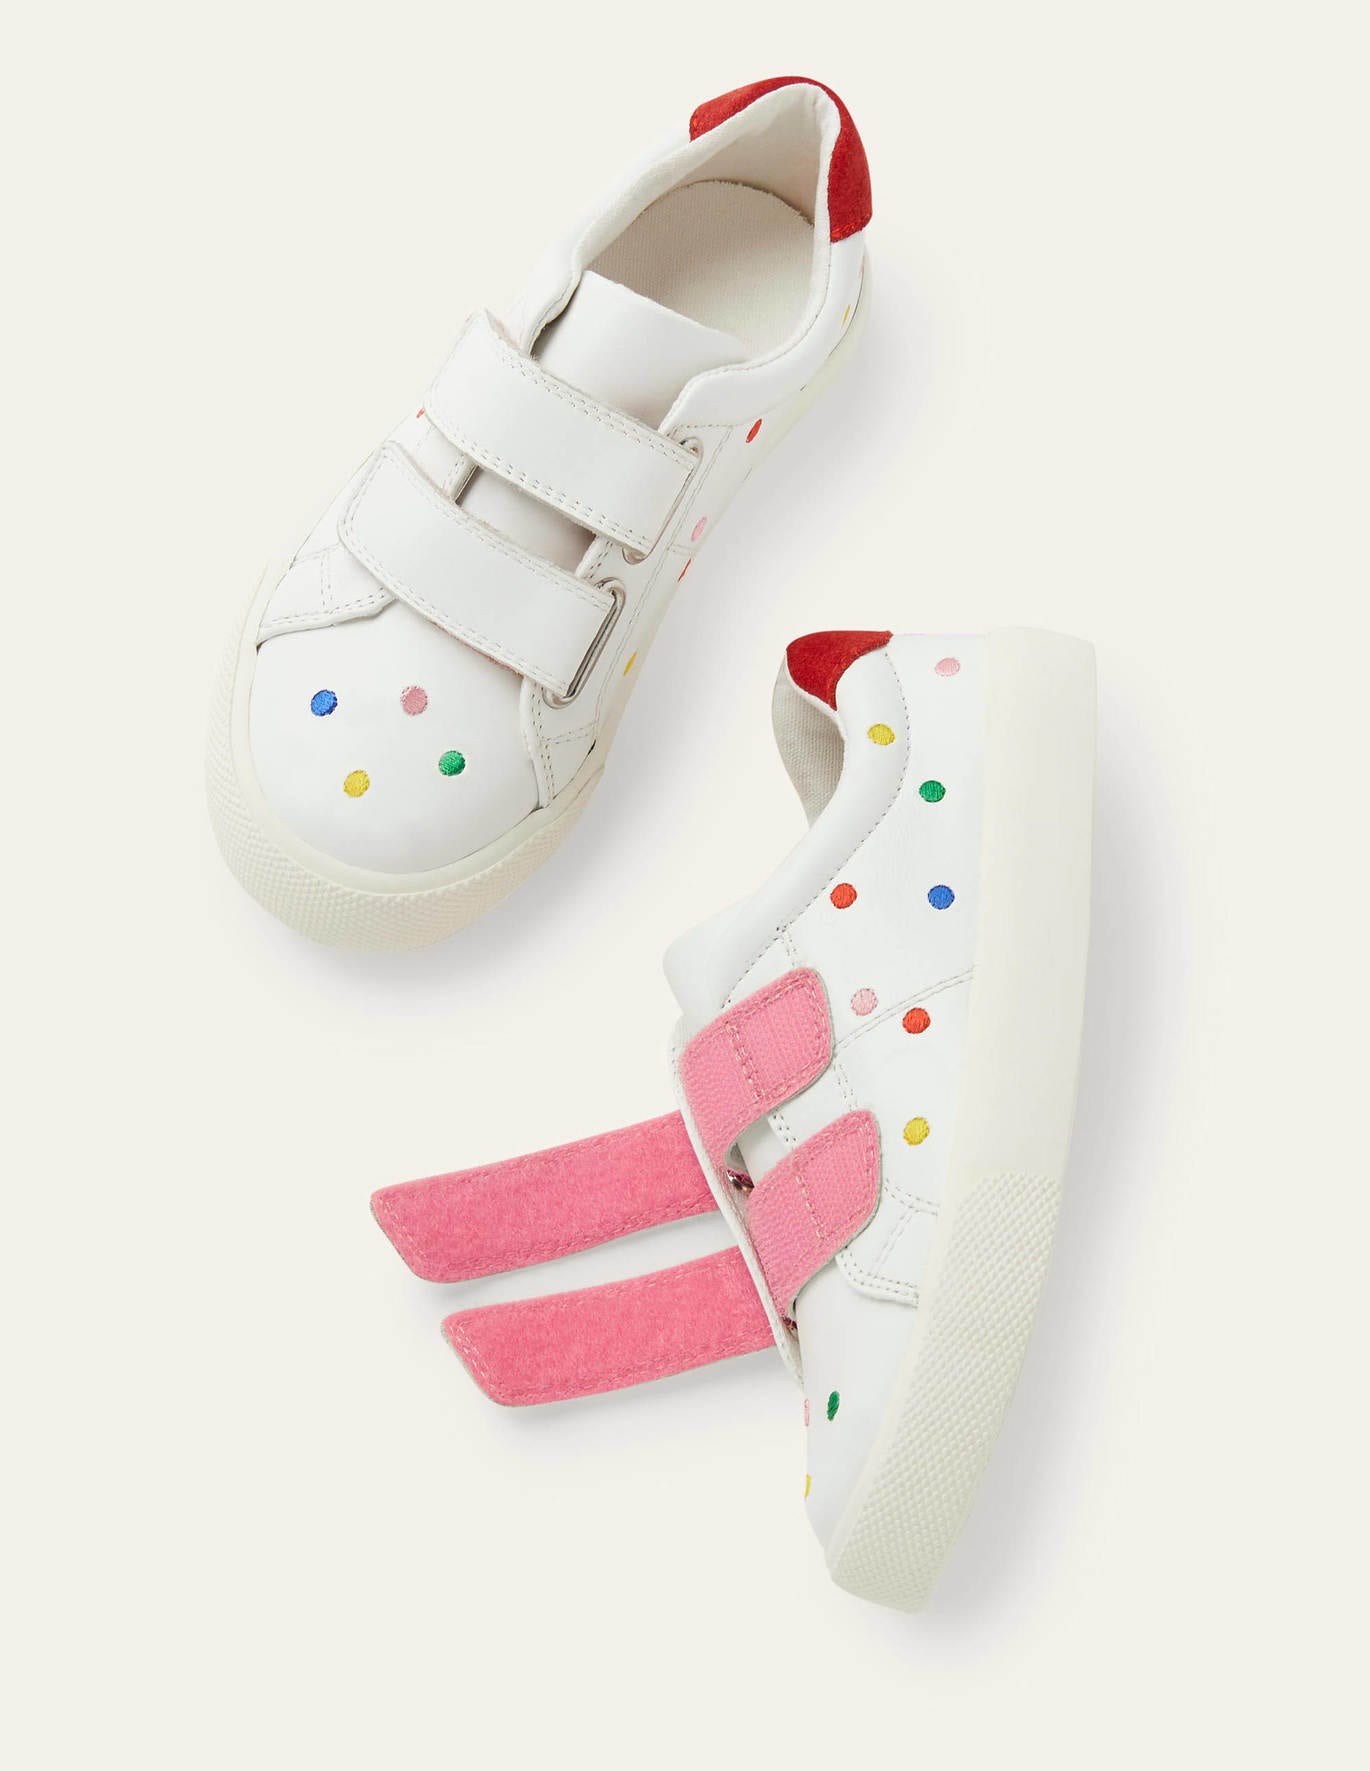 Boden Fun Low Tops - White Leather Rainbow Spots